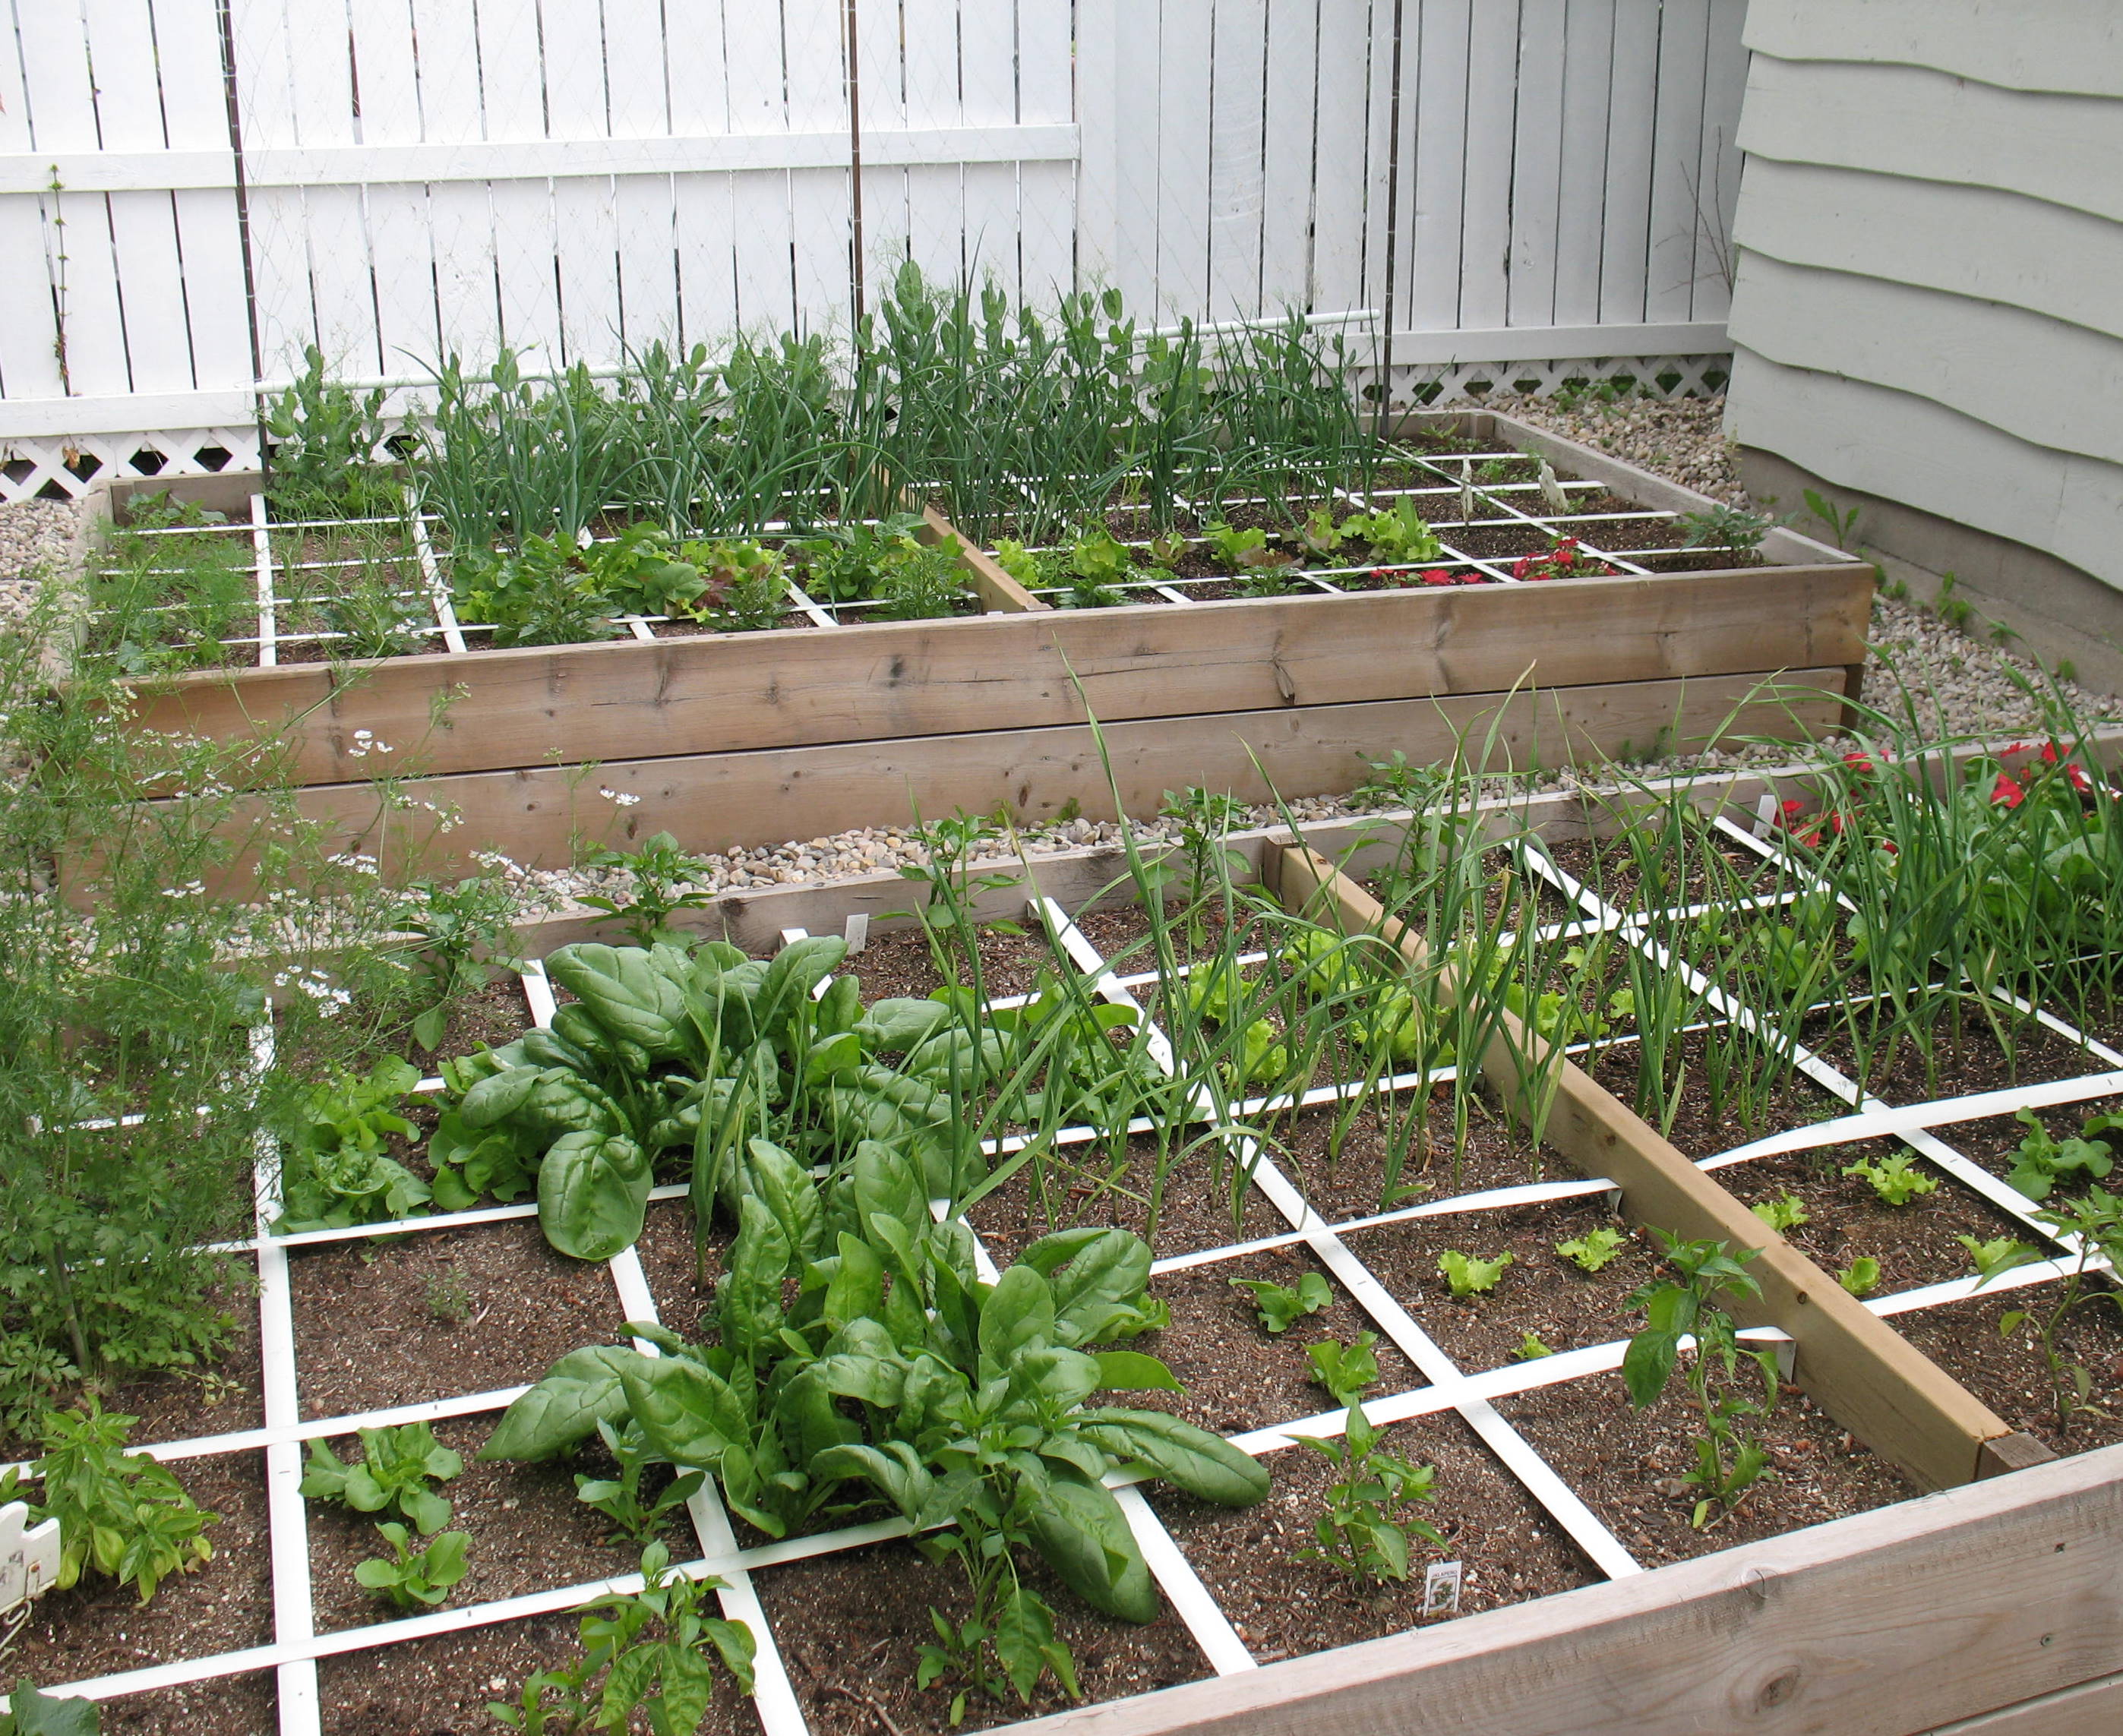 A Square Foot Vegetable Garden